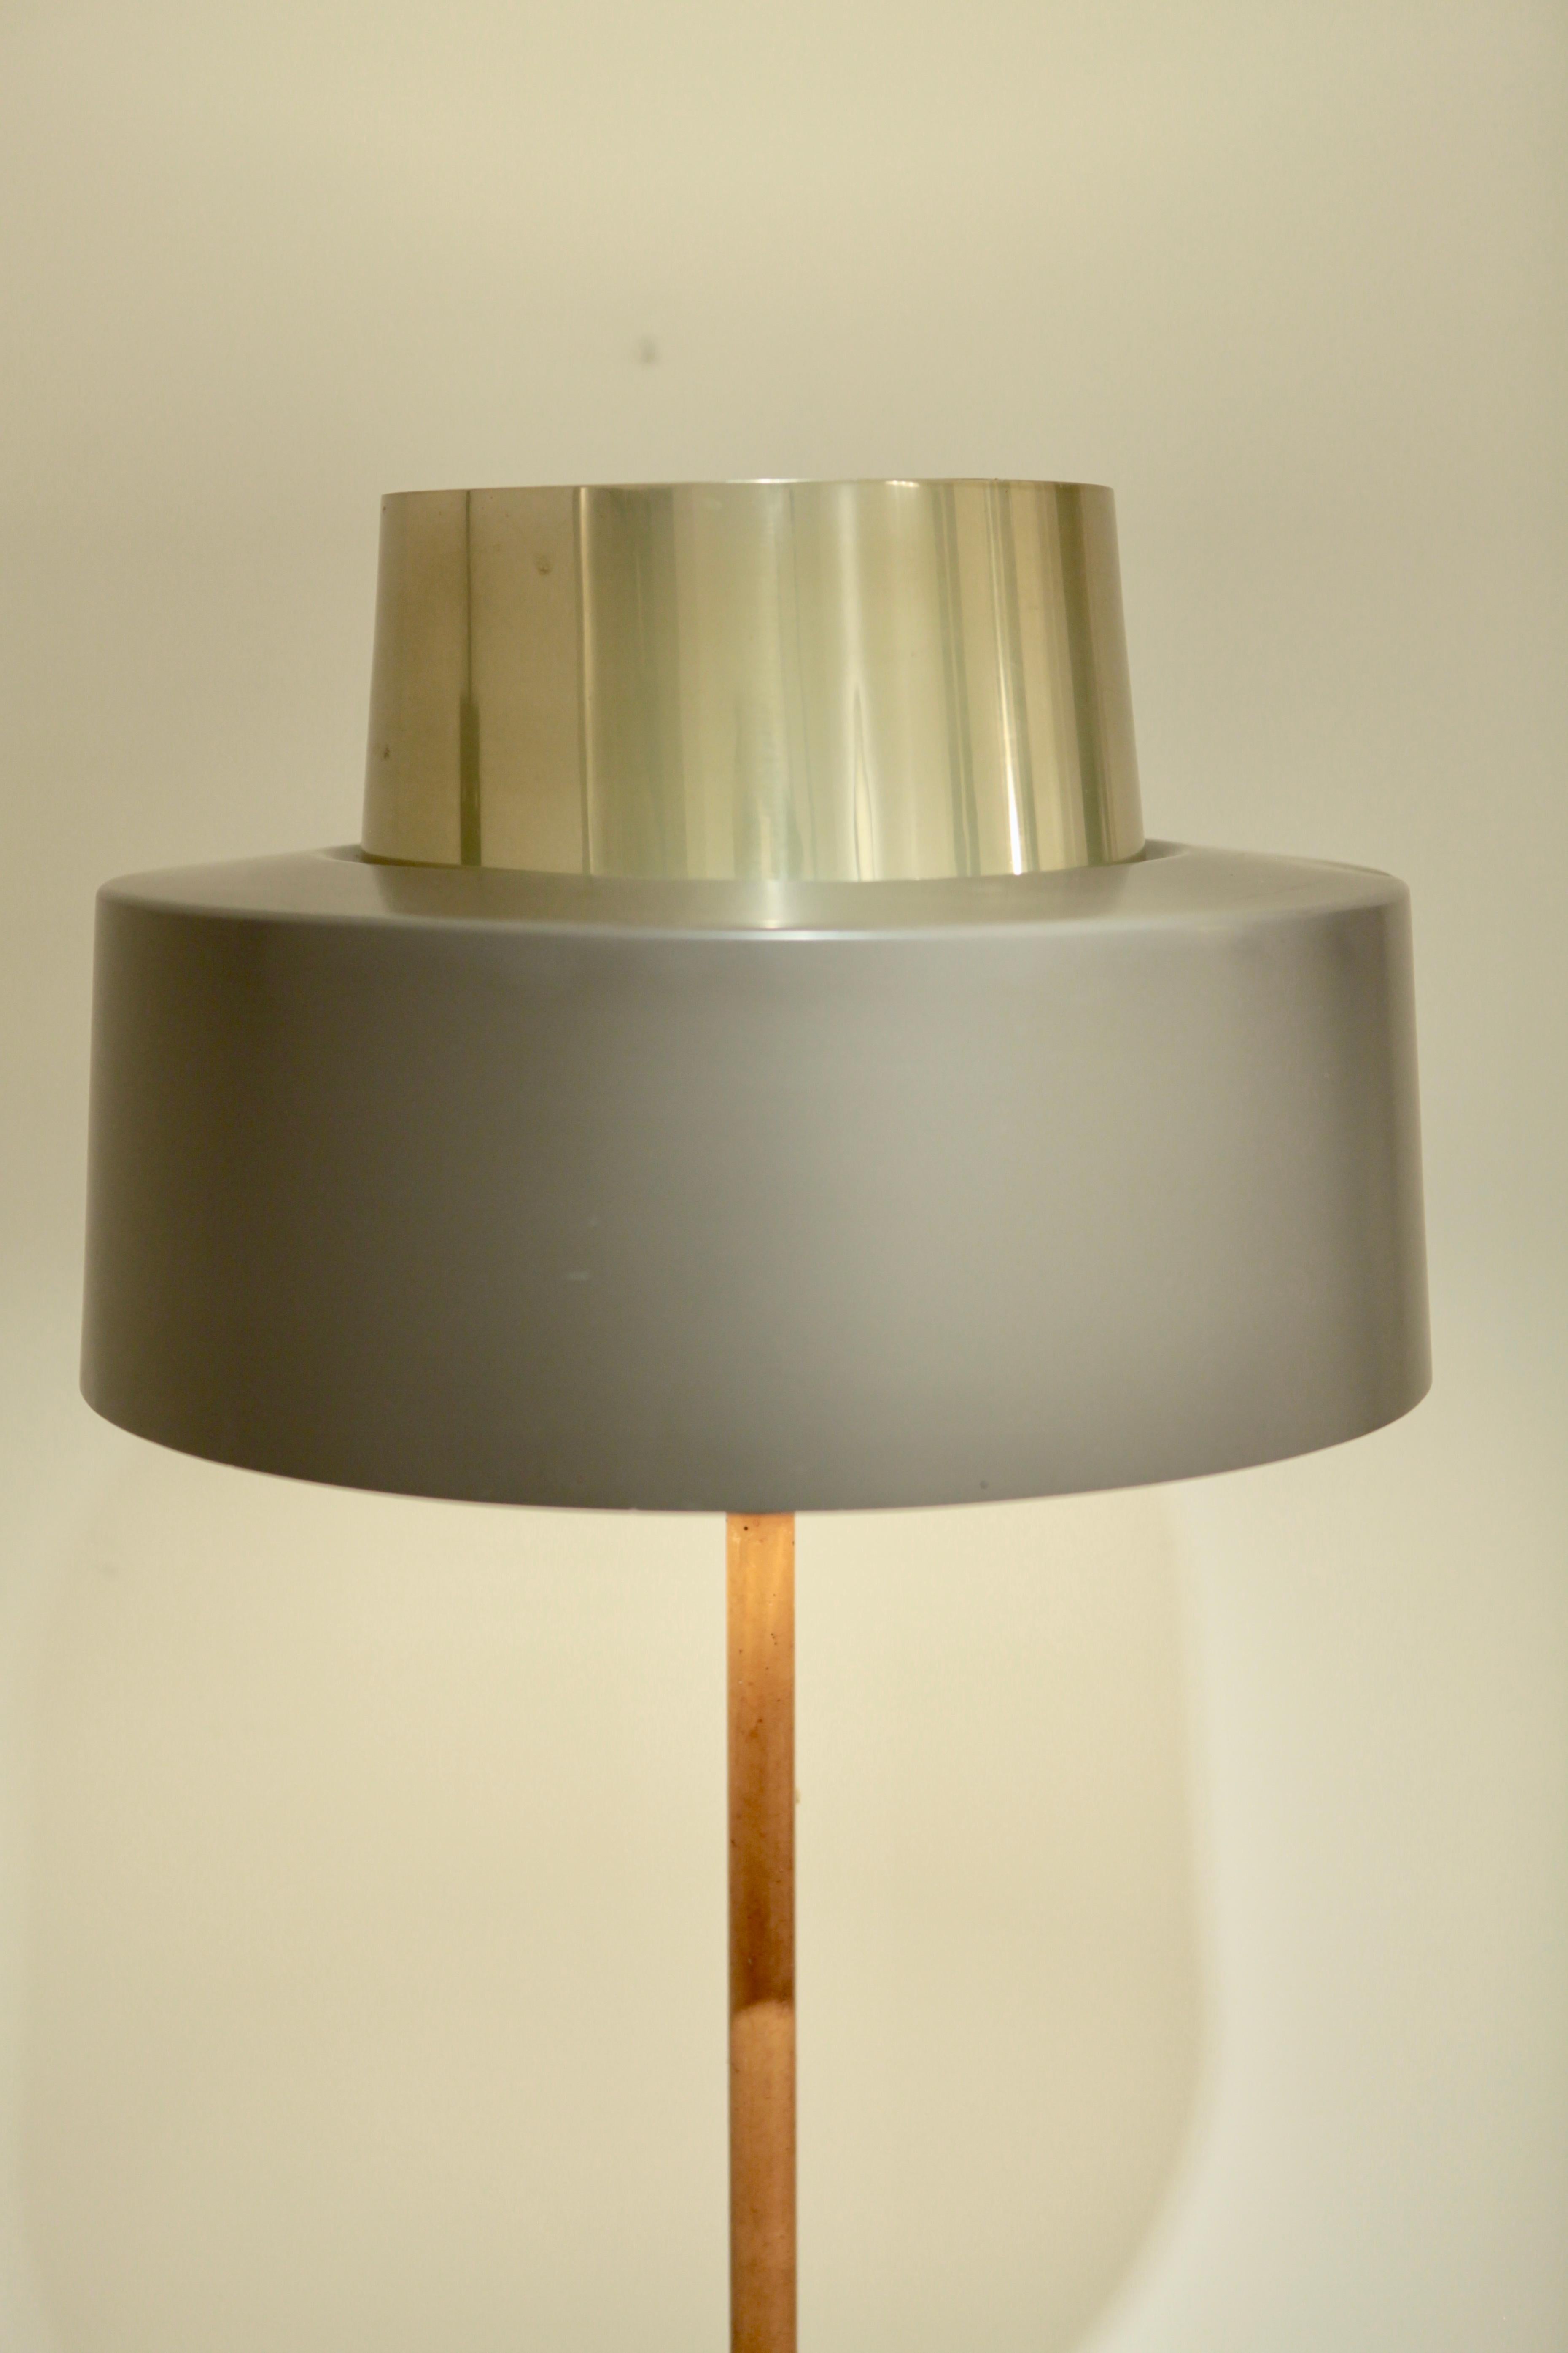 Lisa Johansson-Pape floor lamp by Orno in Finland 1960s.
Rare version with cognac leather covered pole and bronzed and brown painted metal with brass details.
Manufacturer's mark.
 